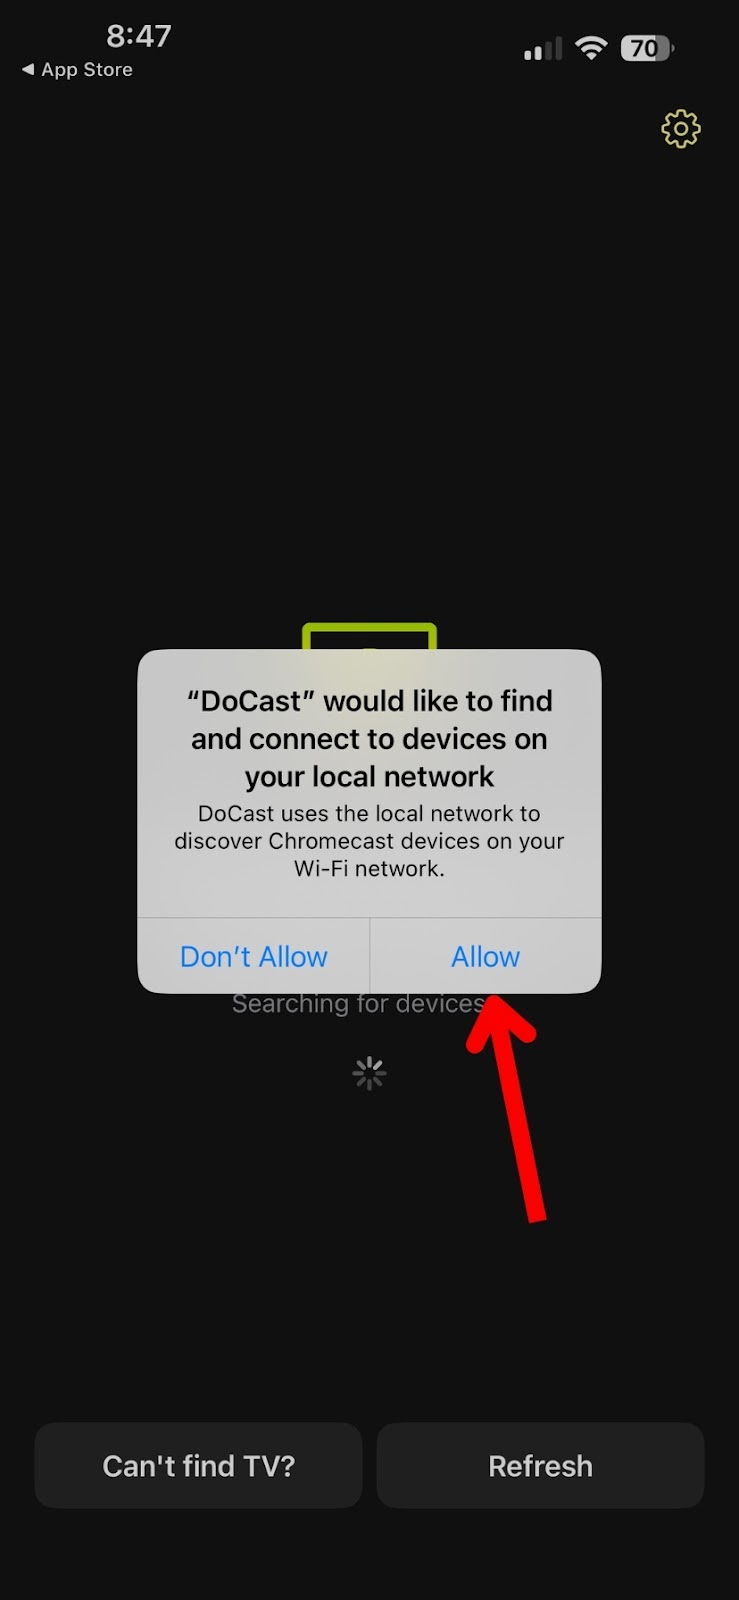 Allow DoCast access to connect to your Wi-Fi and Bluetooth